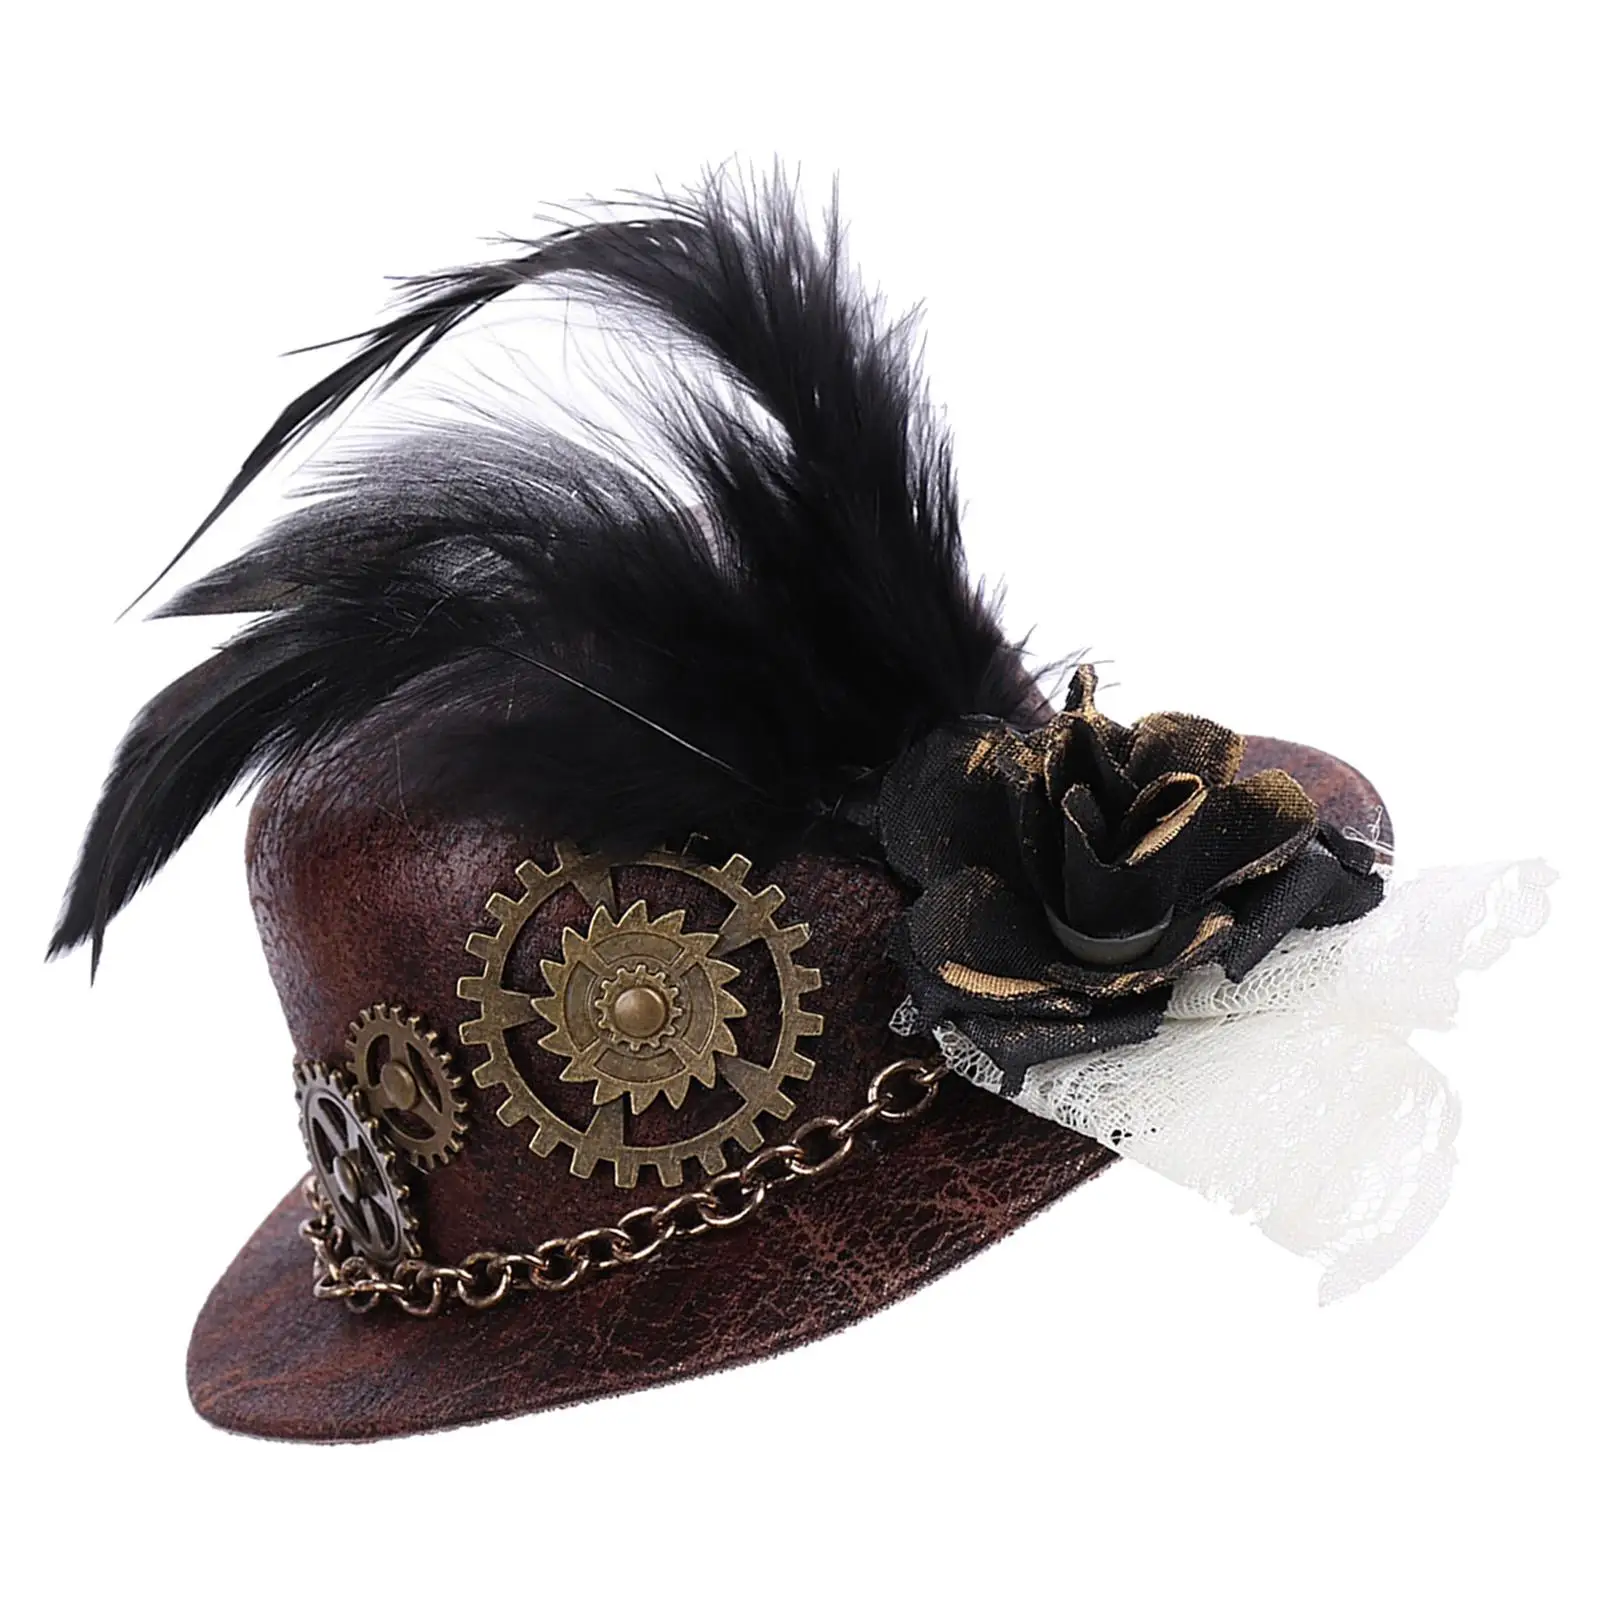 Retro Punk Gothic  Hat  Feather Hair Clip, Accessories for  Carnival  Costume DIY Yourself Jazz Hat